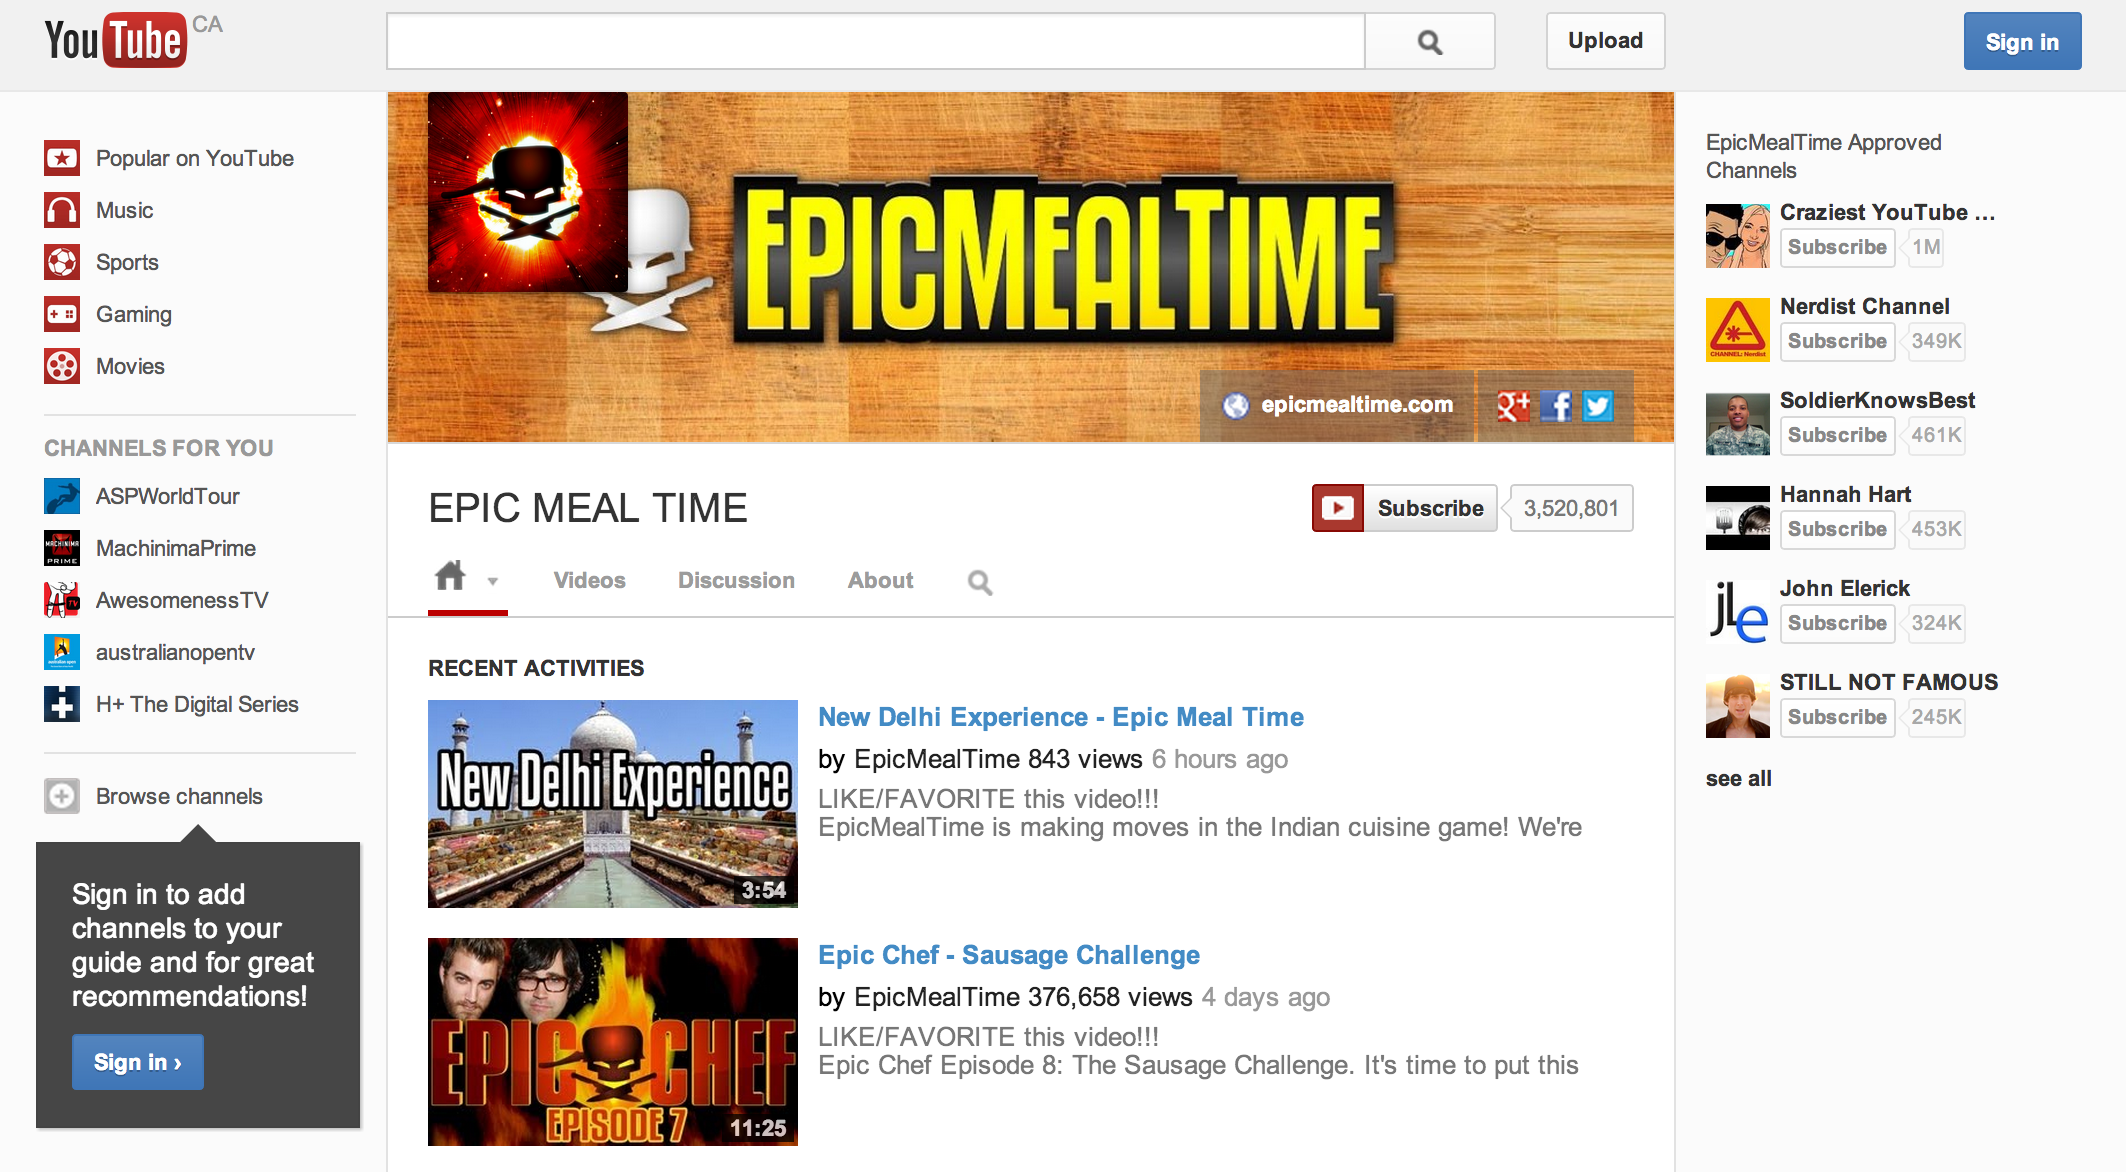 EpicMealTime-YouTubeOne-Channel-Design